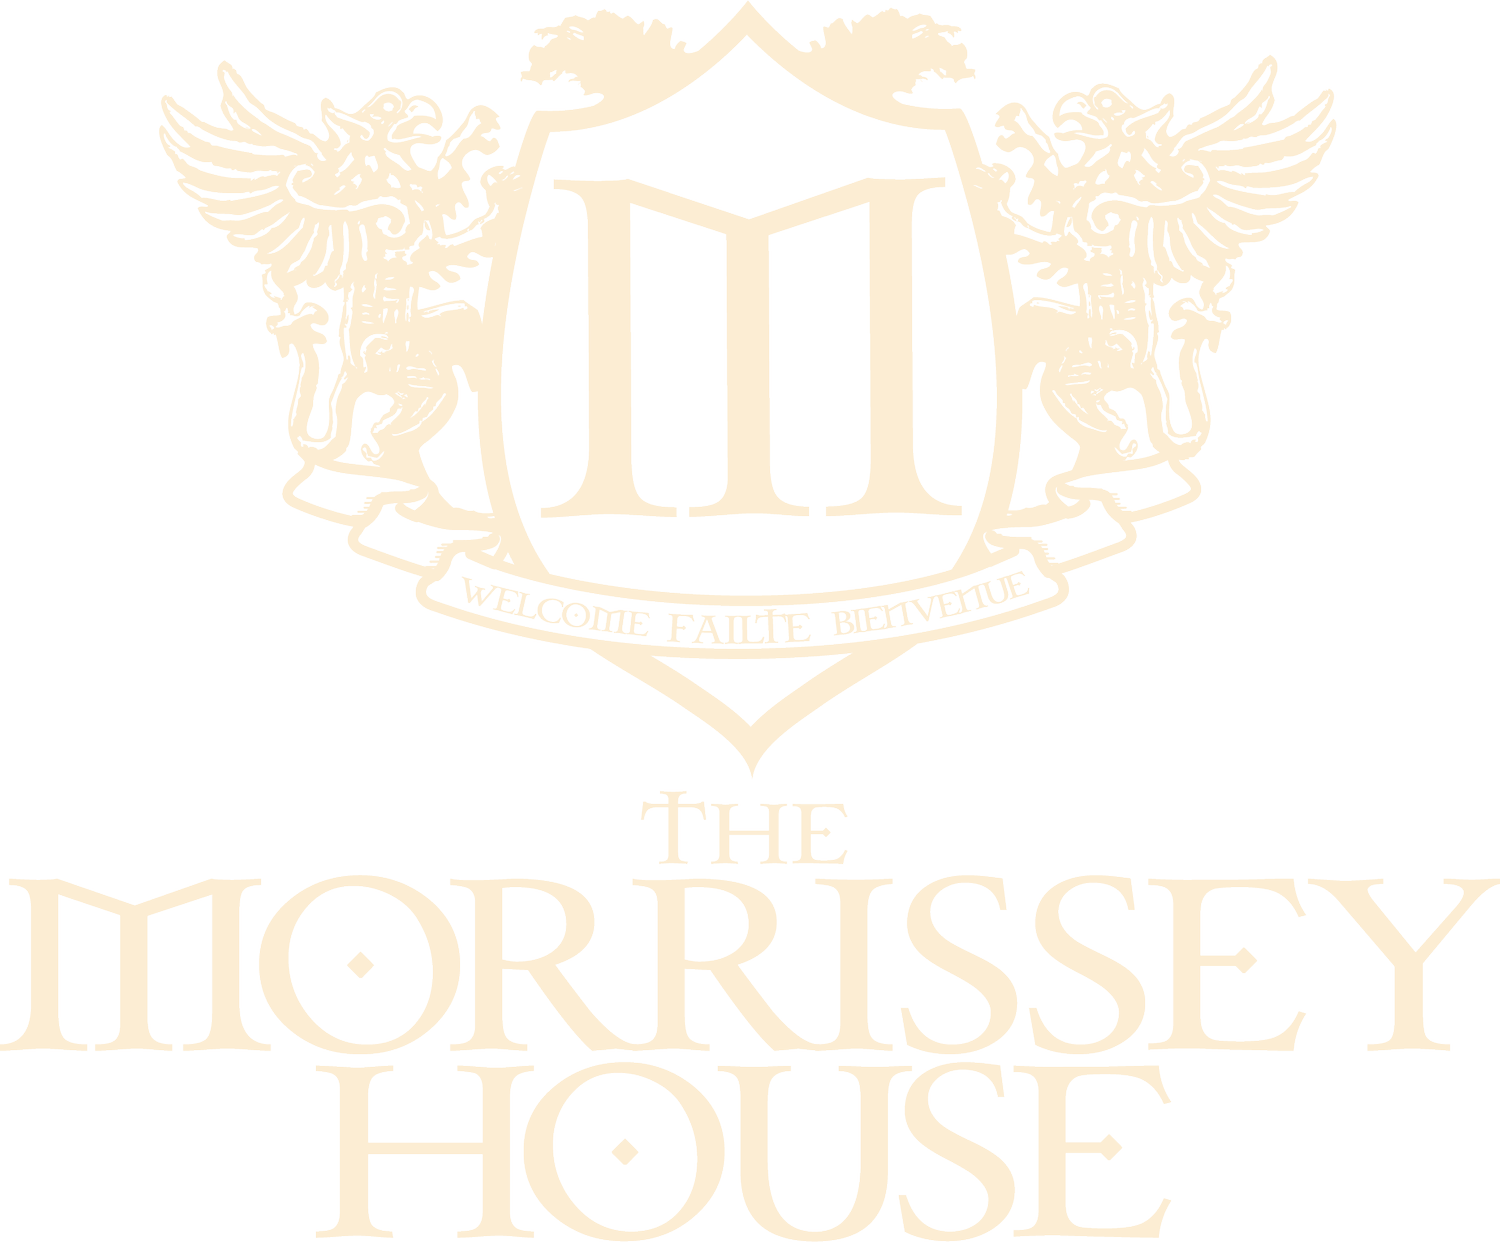 The Morrissey House